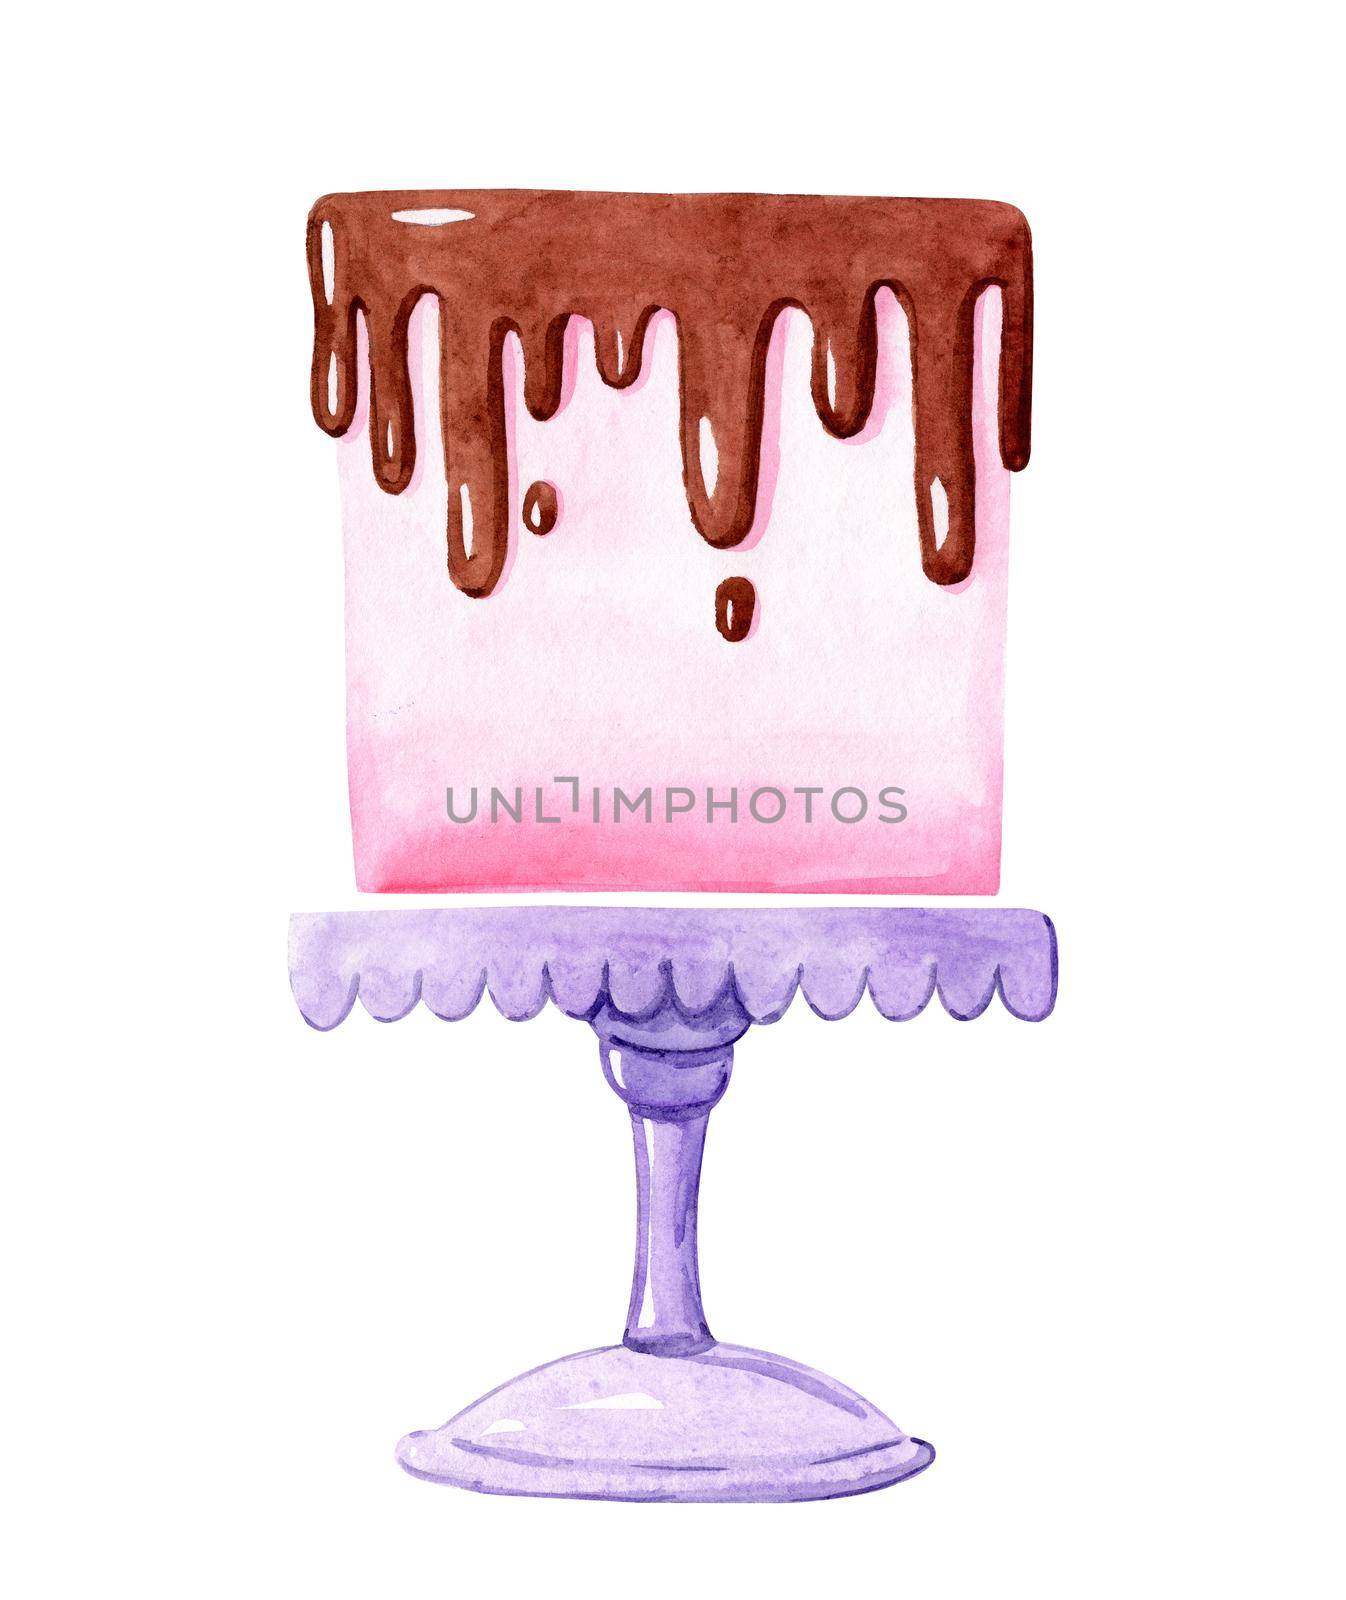 watercolor pink cake on purple stand isolated on white background. Bakery logo, catering design by dreamloud